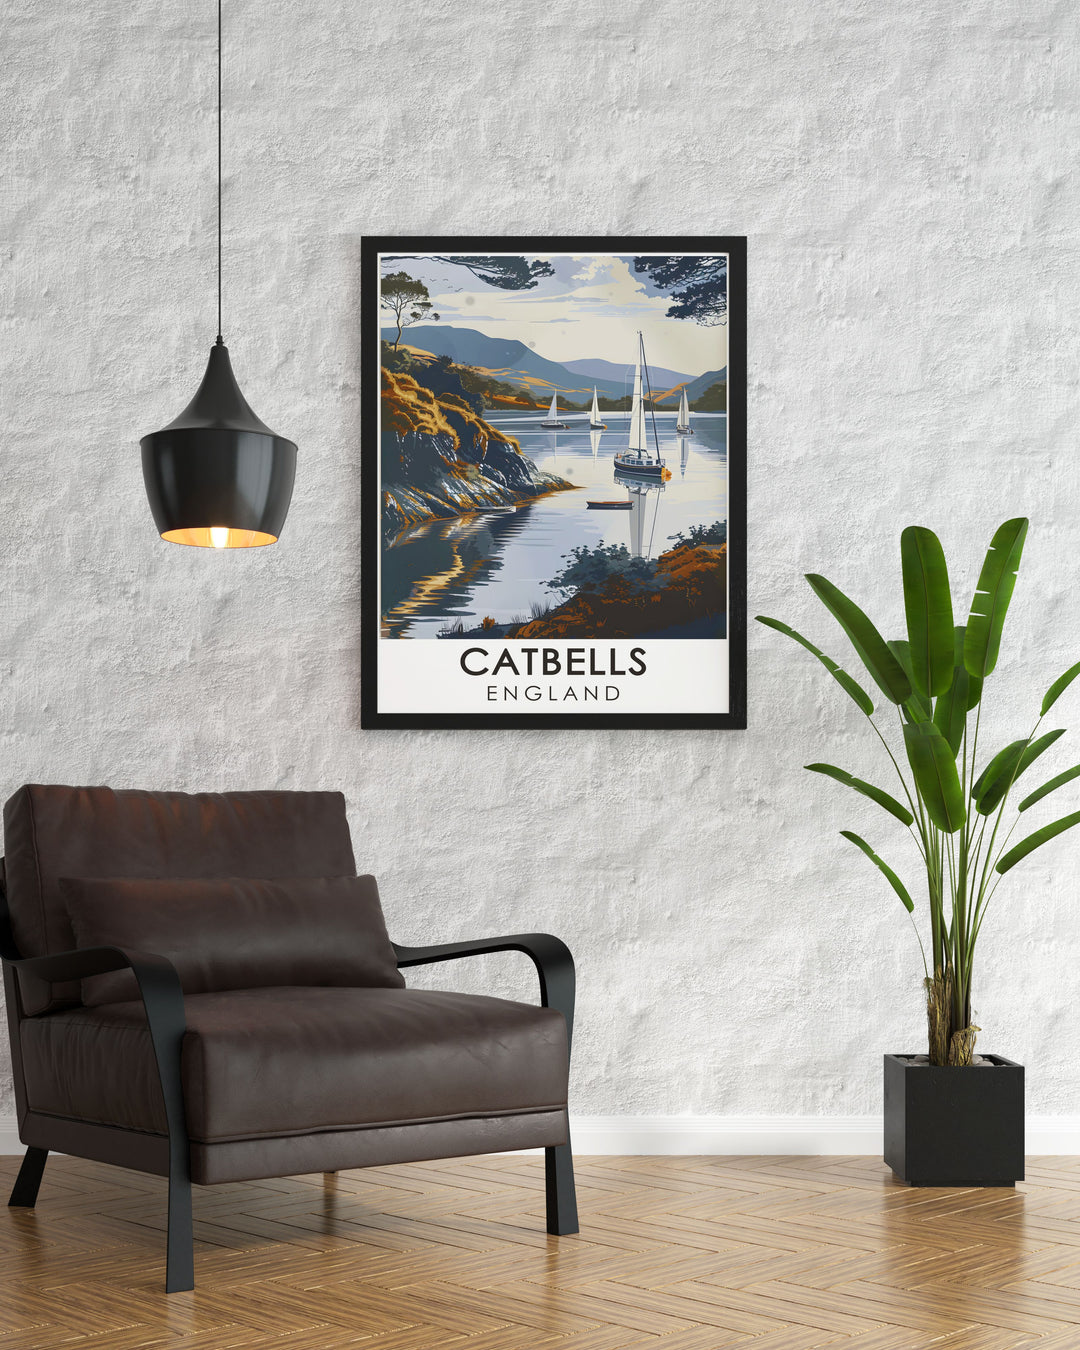 Catbells Summit wall art offering a detailed and vibrant portrayal of the iconic summit and Derwentwater Shoreline making it a striking addition to your home decor and an inspiring piece for travel enthusiasts